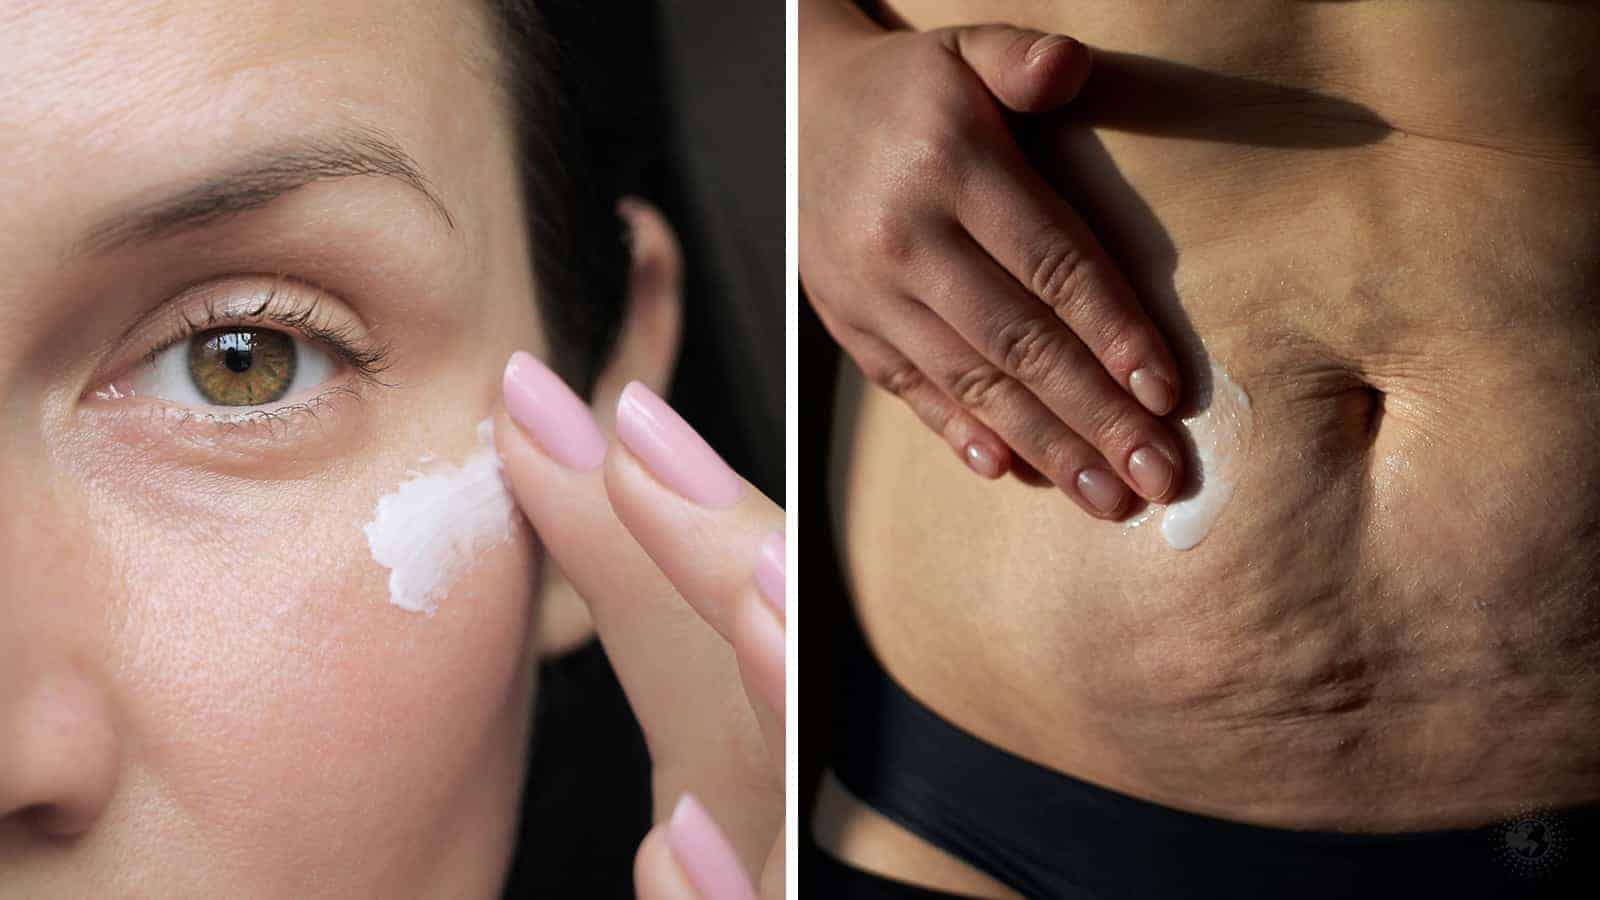 Dermatologists Reveal 10 Beauty Treatments That Are a Waste of Money